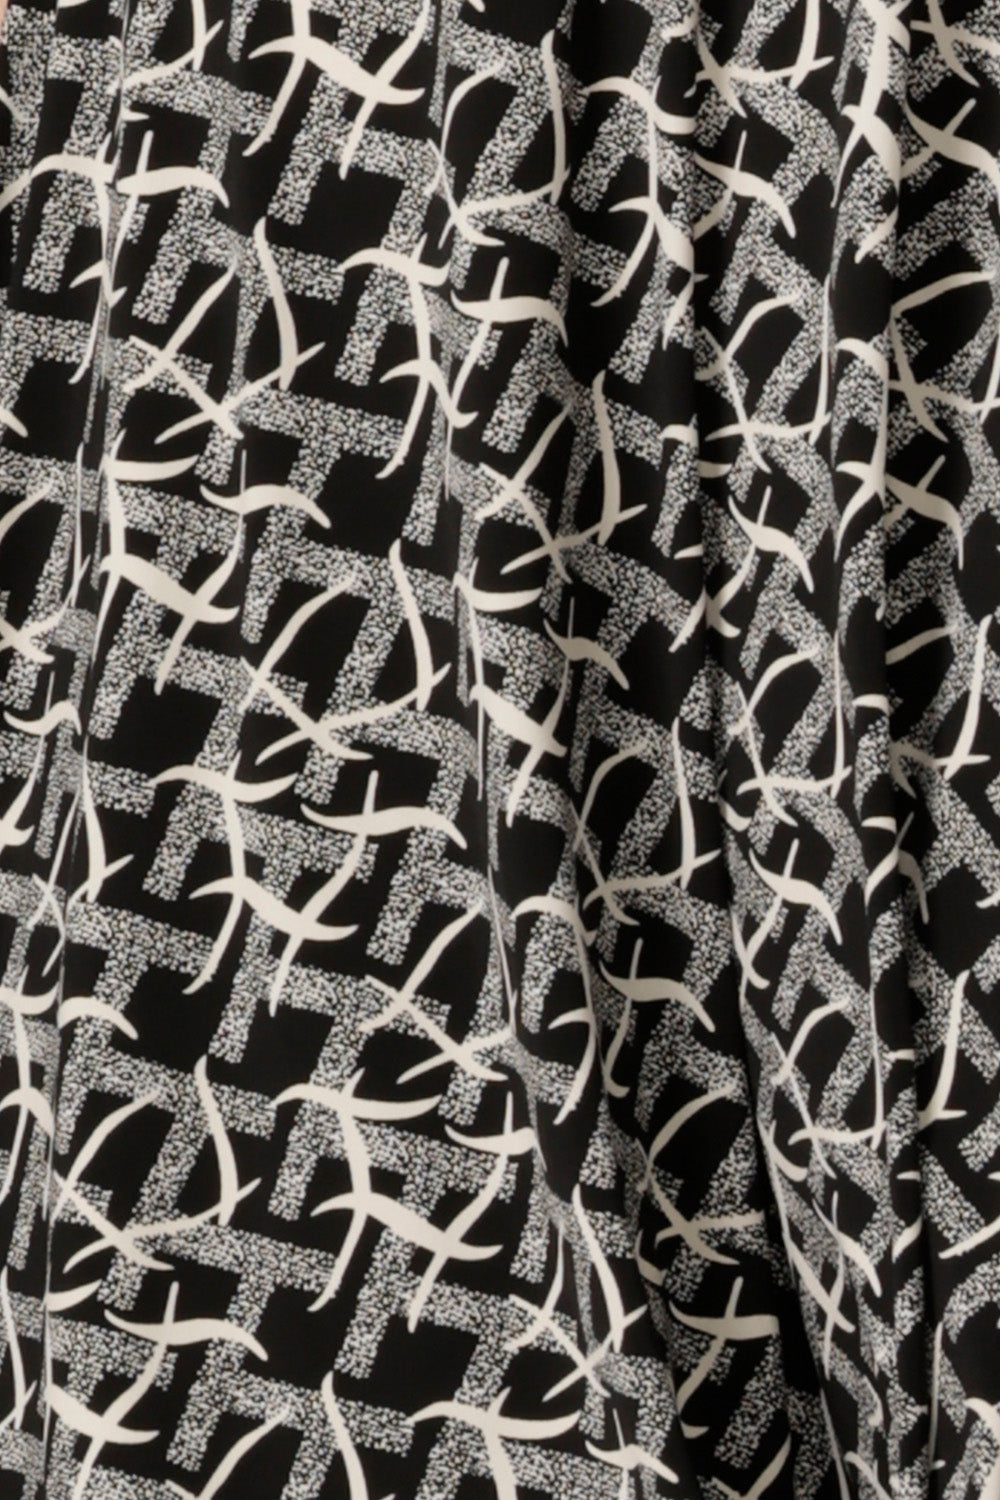 a swatch of the graphic black and white Thornbirds print on dry touch jersey, used by Australian and New Zealand women's clothing company, L&F to make a range of workwear tops and pants for women.